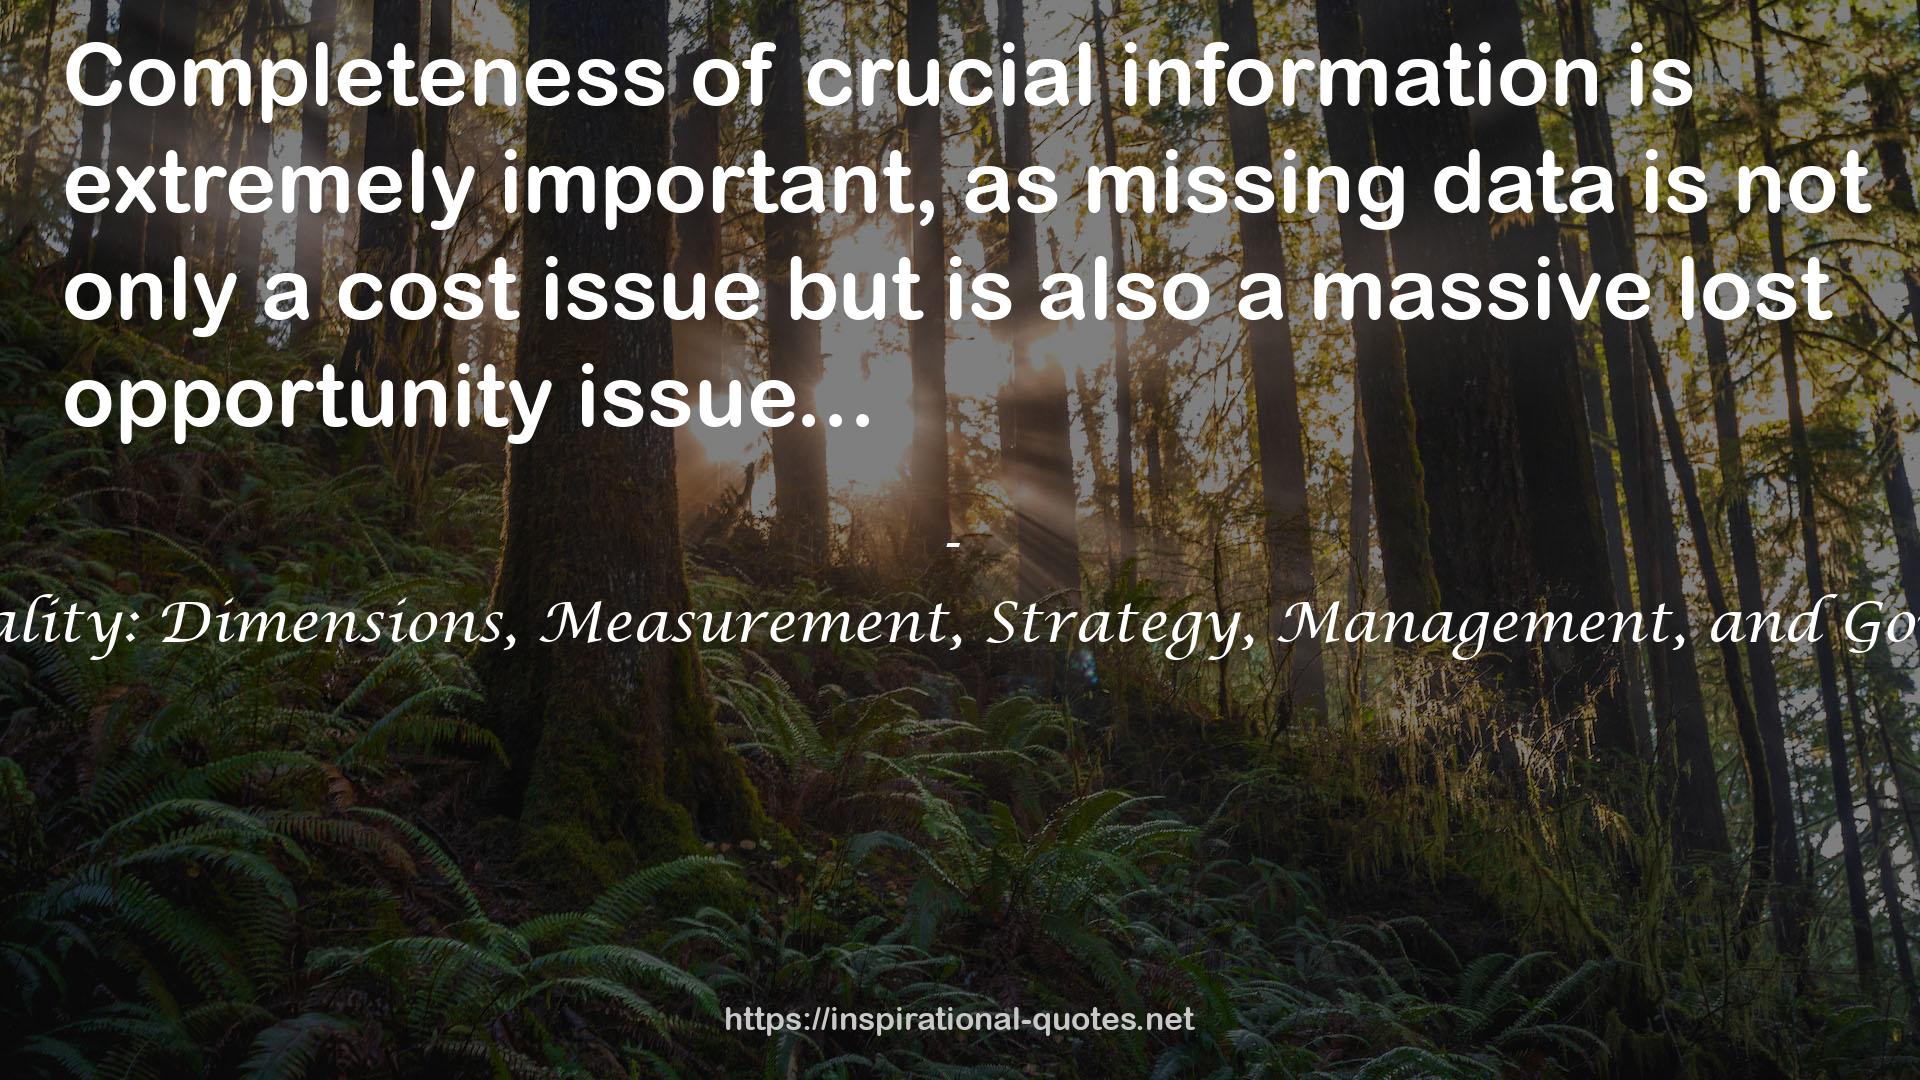 Data Quality: Dimensions, Measurement, Strategy, Management, and Governance QUOTES